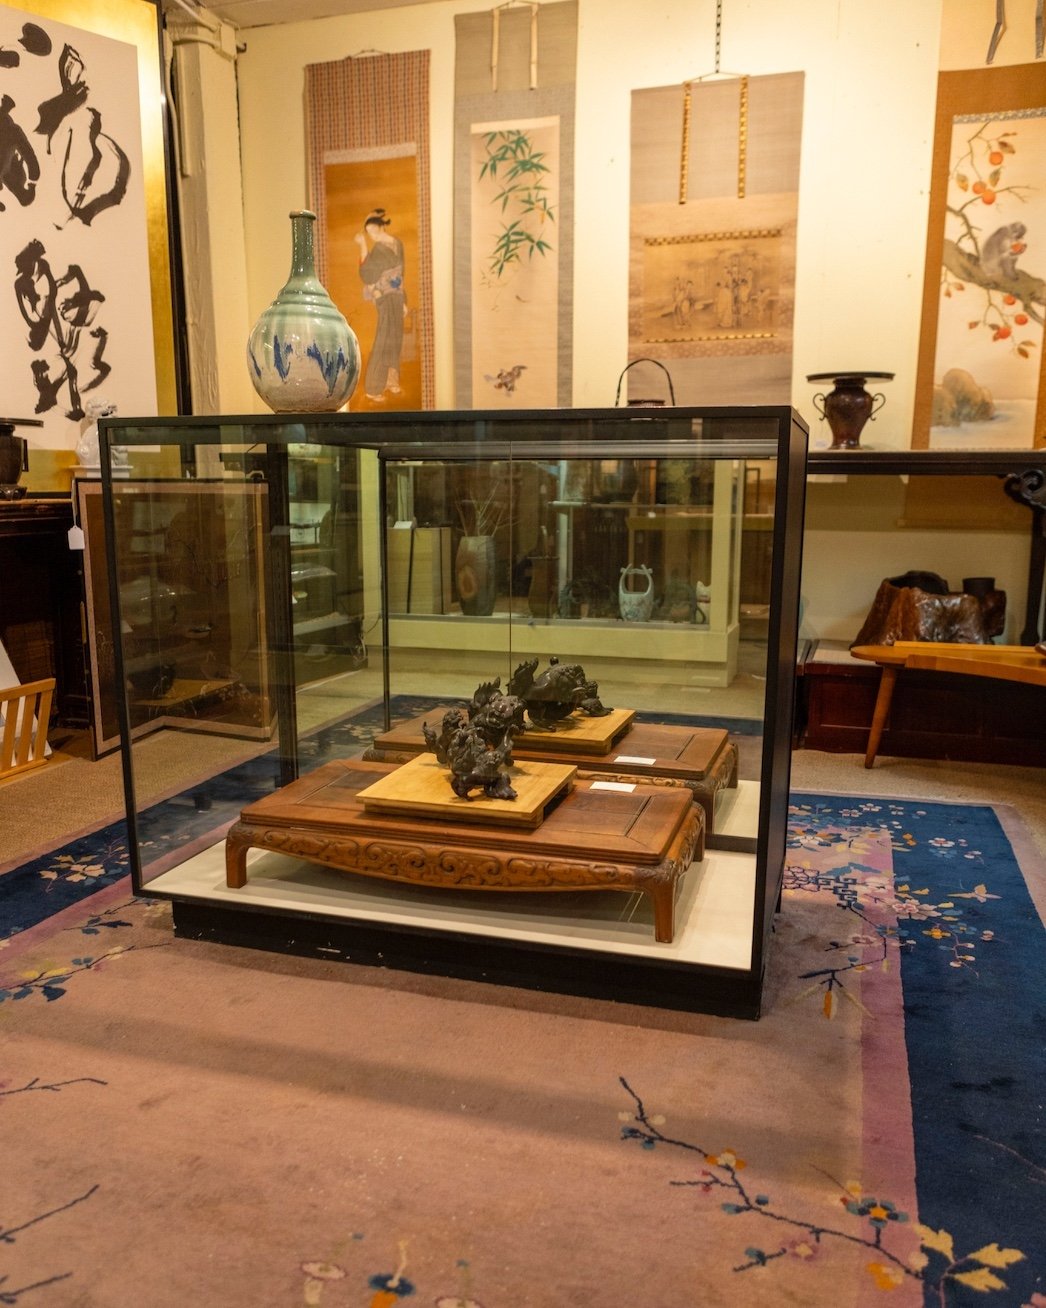 One thing we love about #antiques is that they help preserve history across cultures and give old items a new lease on life. 🏺 What do you love about antiques? Tell us in the comments! 👇⠀
⠀
#ShopVintage #AntiqueShop #AntiqueCenter #Japaneseantiques